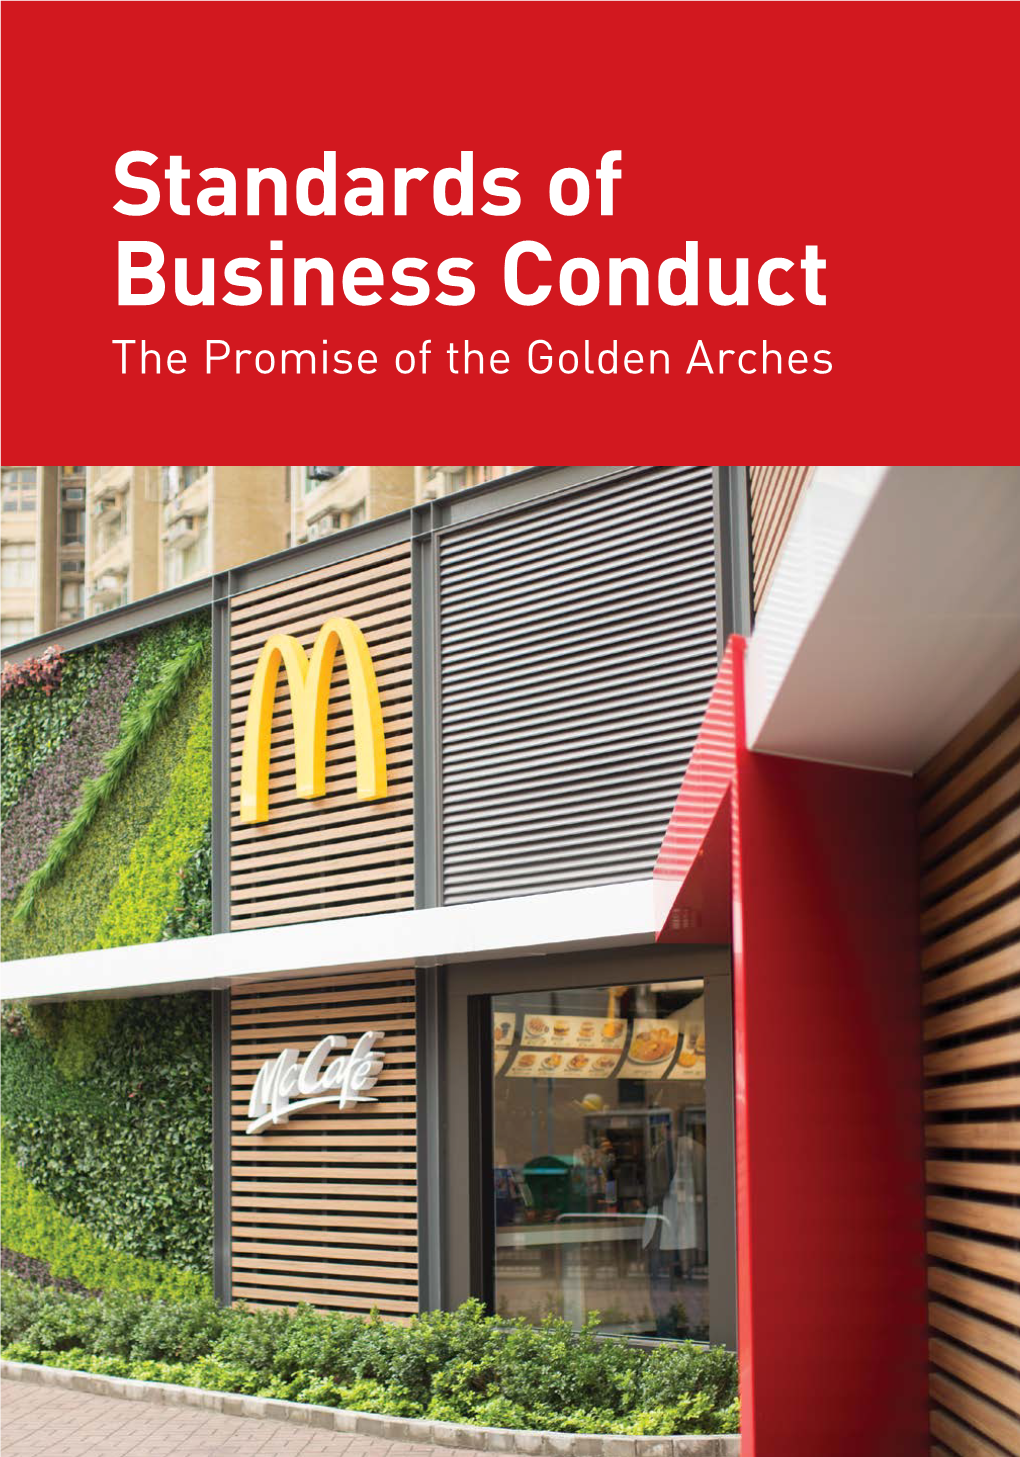 Standards of Business Conduct the Promise of the Golden Arches the Basis for Our Entire Business Is That We Are Ethical, Truthful and Dependable